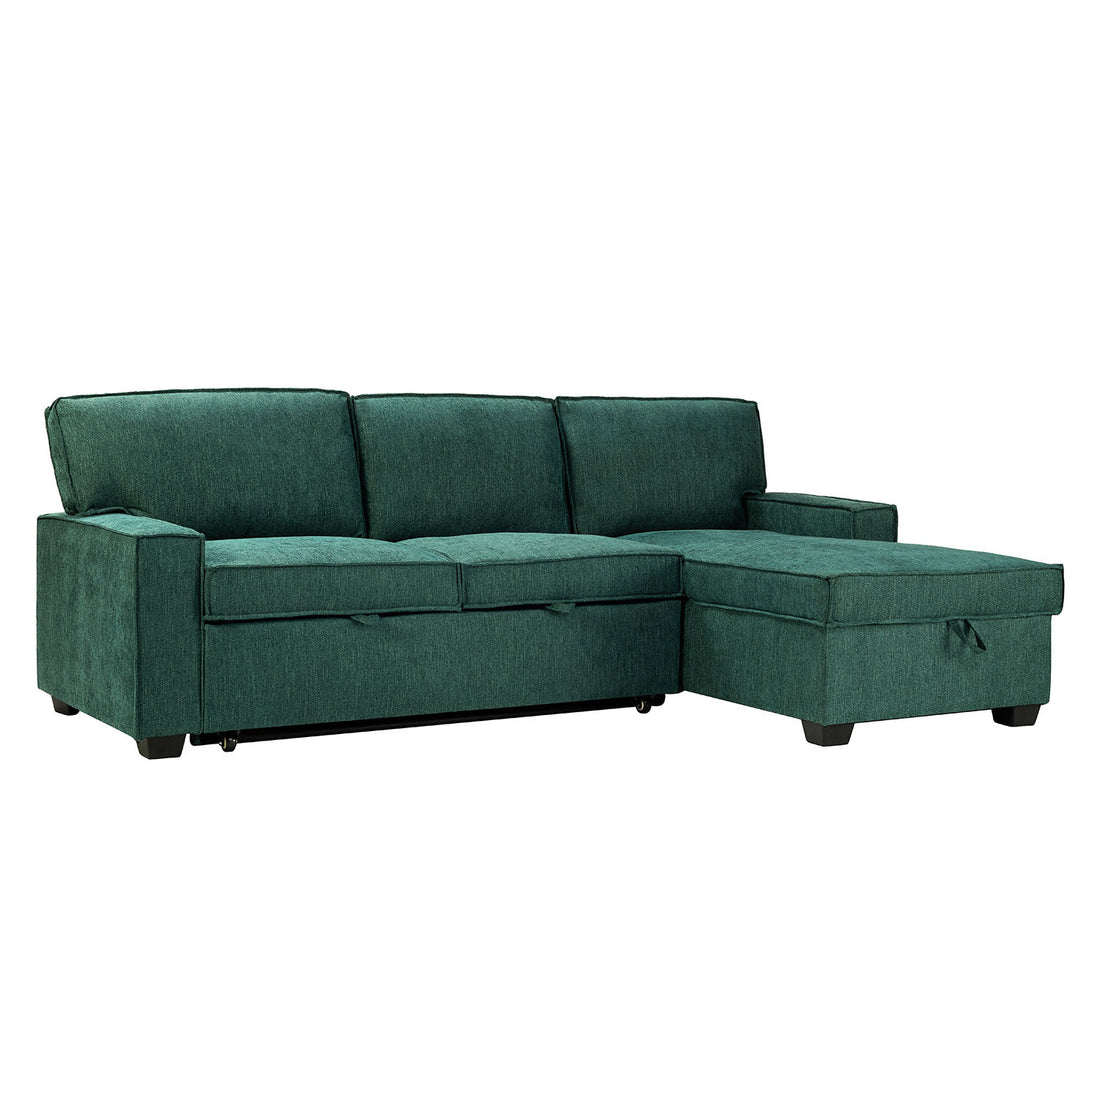 Roger Pull Out Sleeper Sectional Teal - Teal